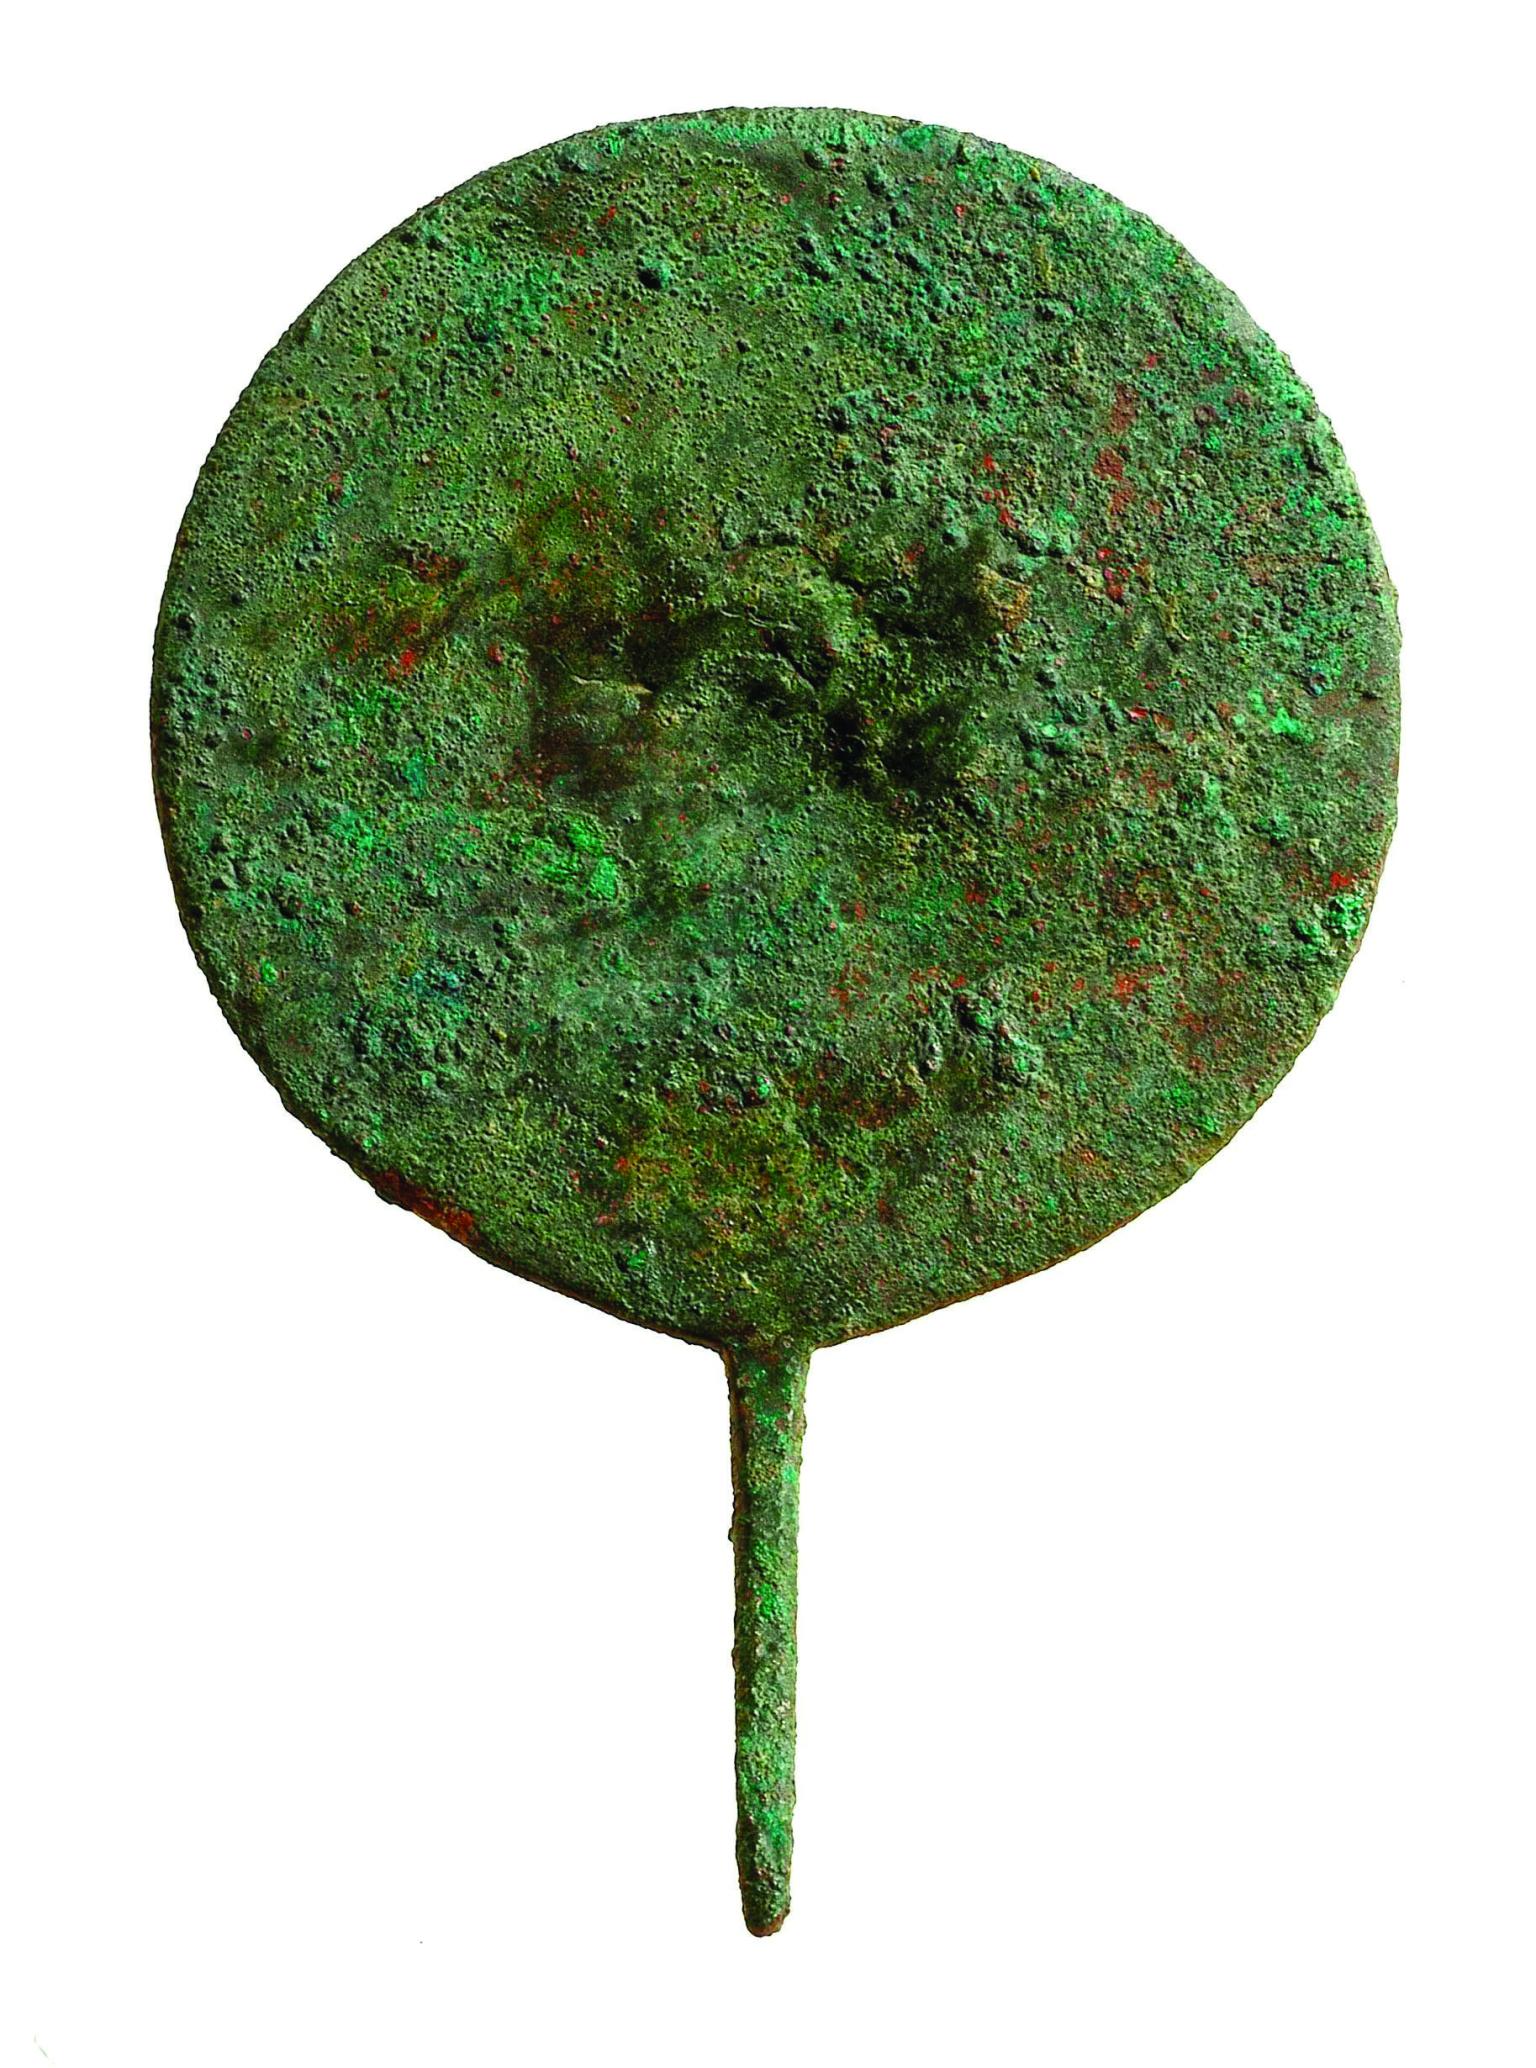 A circular metal disc with small handle.